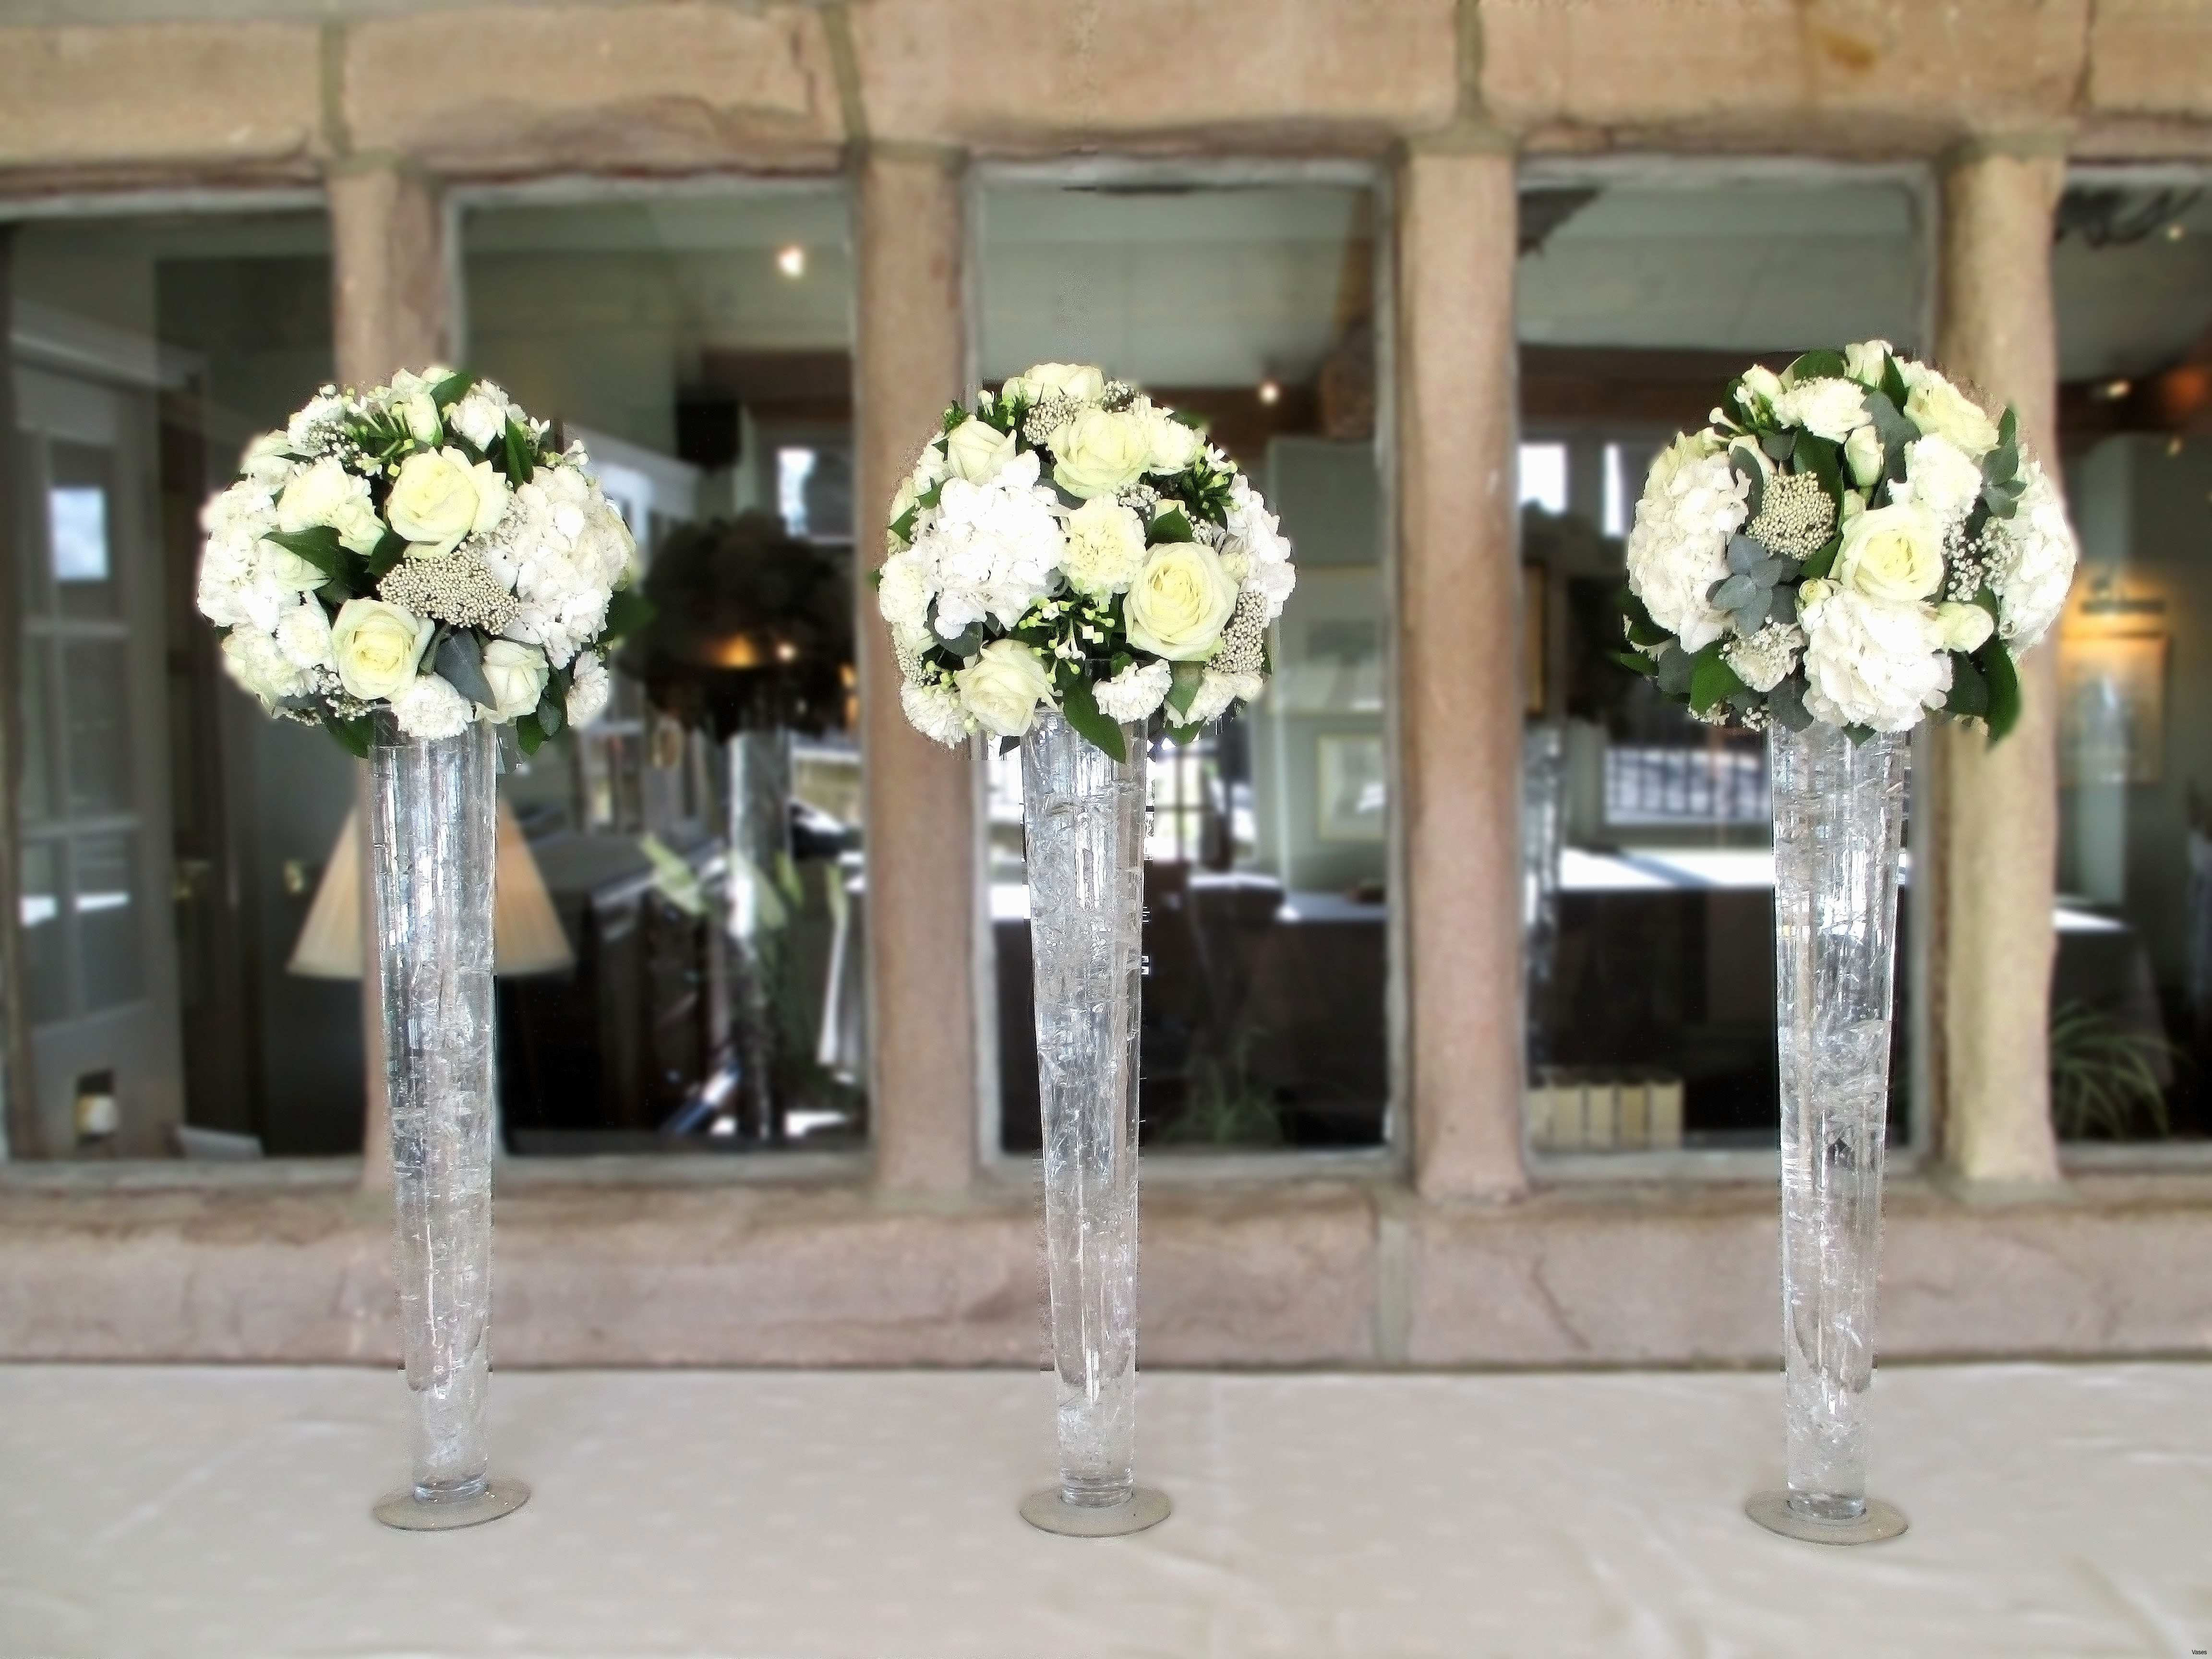 10 Ideal Tall Vases for Wedding Reception Centerpieces 2024 free download tall vases for wedding reception centerpieces of 15 unique photos of tall wedding reception centerpieces wedding in tall wedding reception centerpieces best of vases long vase wedding center